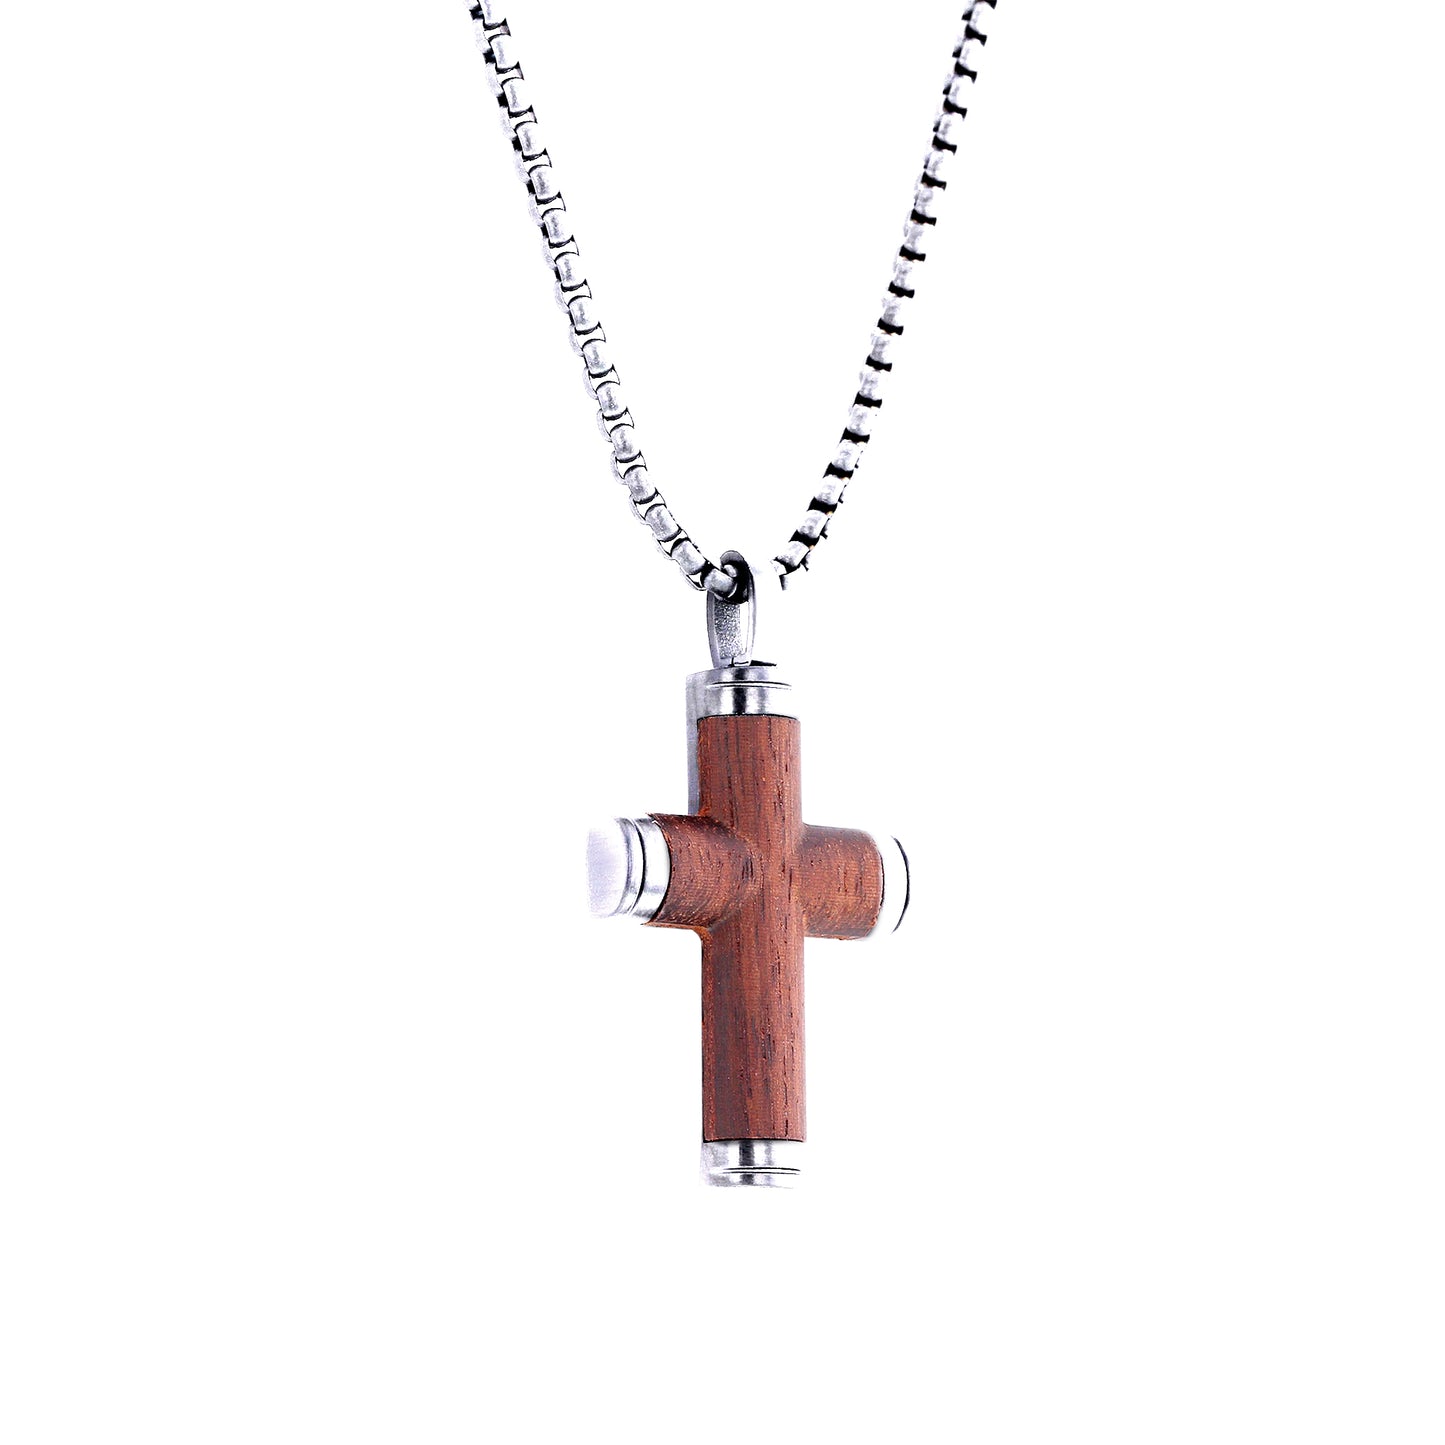 Calvary Stainless Steel and Wood Cross Necklace